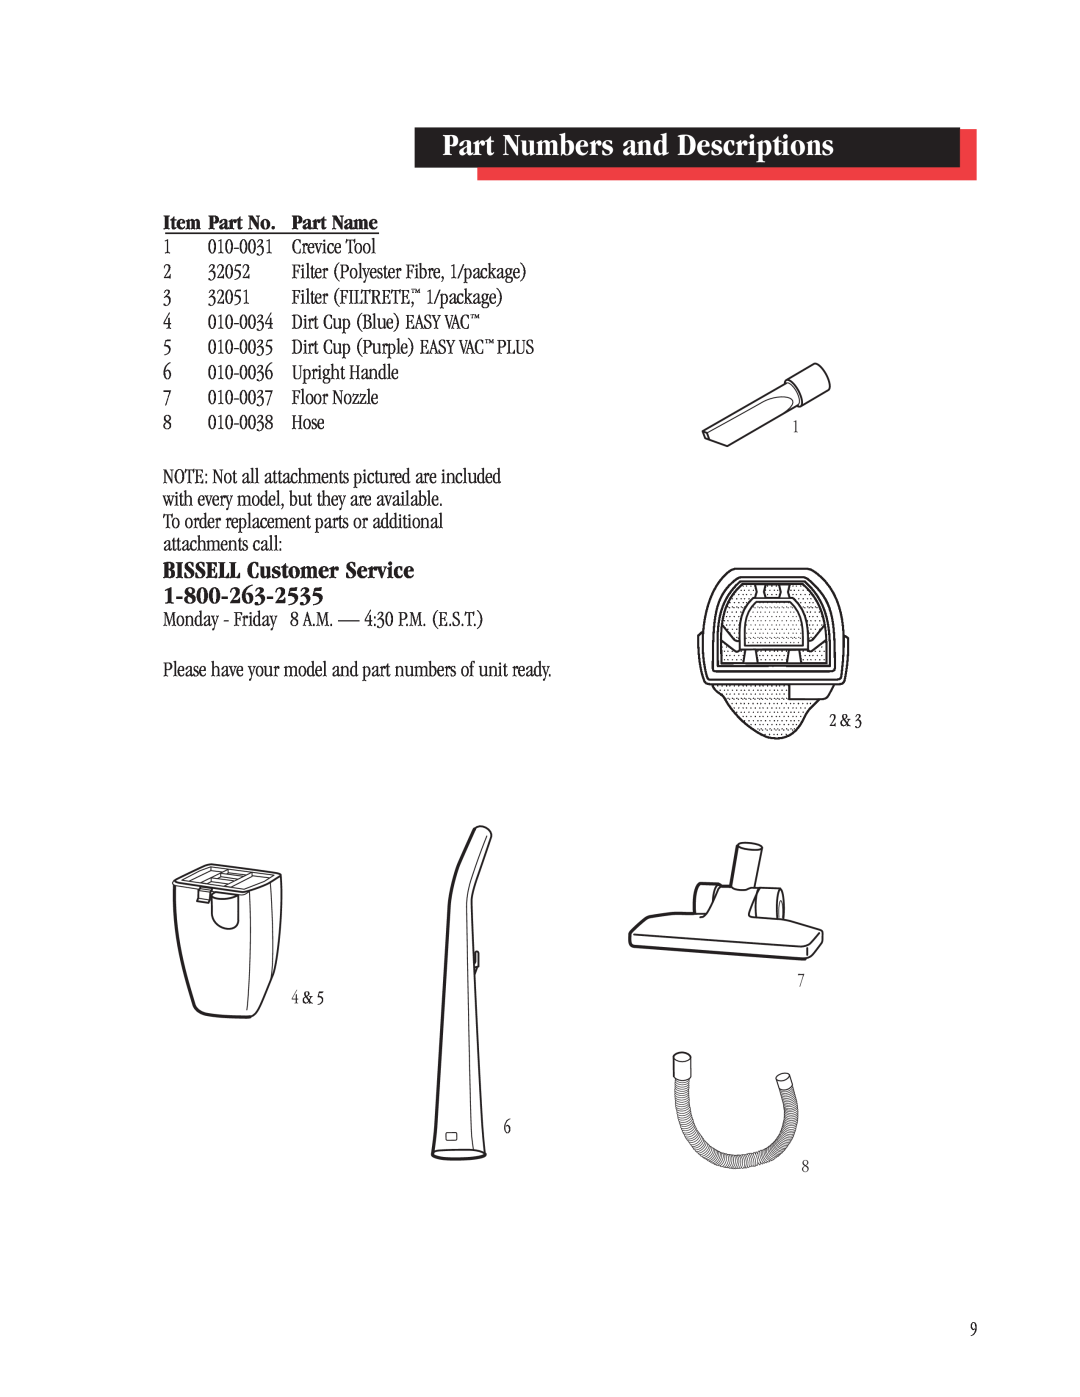 Bissell 3101, 3102 warranty Part Numbers and Descriptions, Item Part No. Part Name, BISSELL Customer Service 